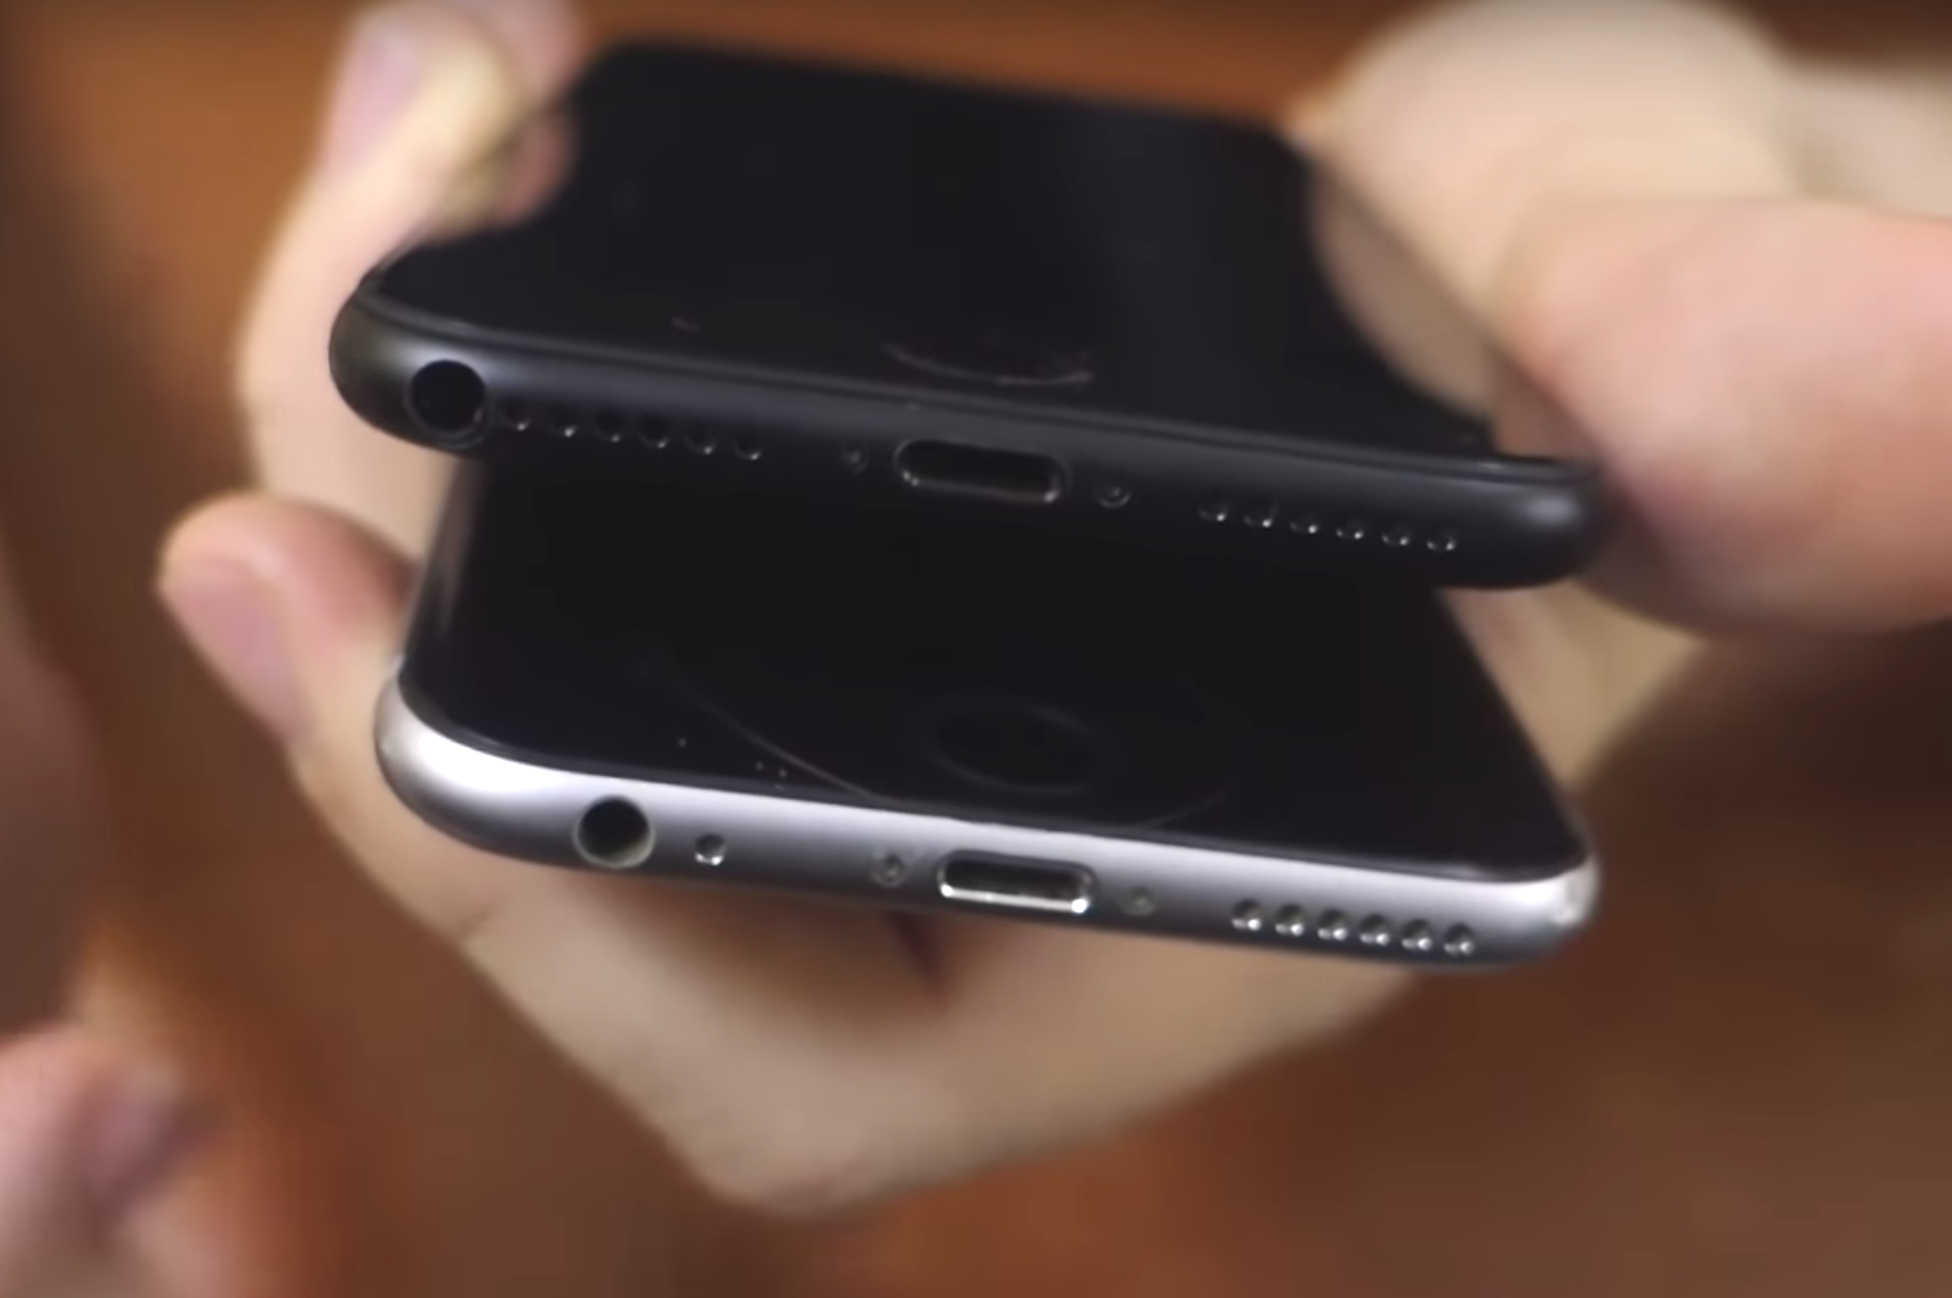 Add a headphone jack to your iPhone